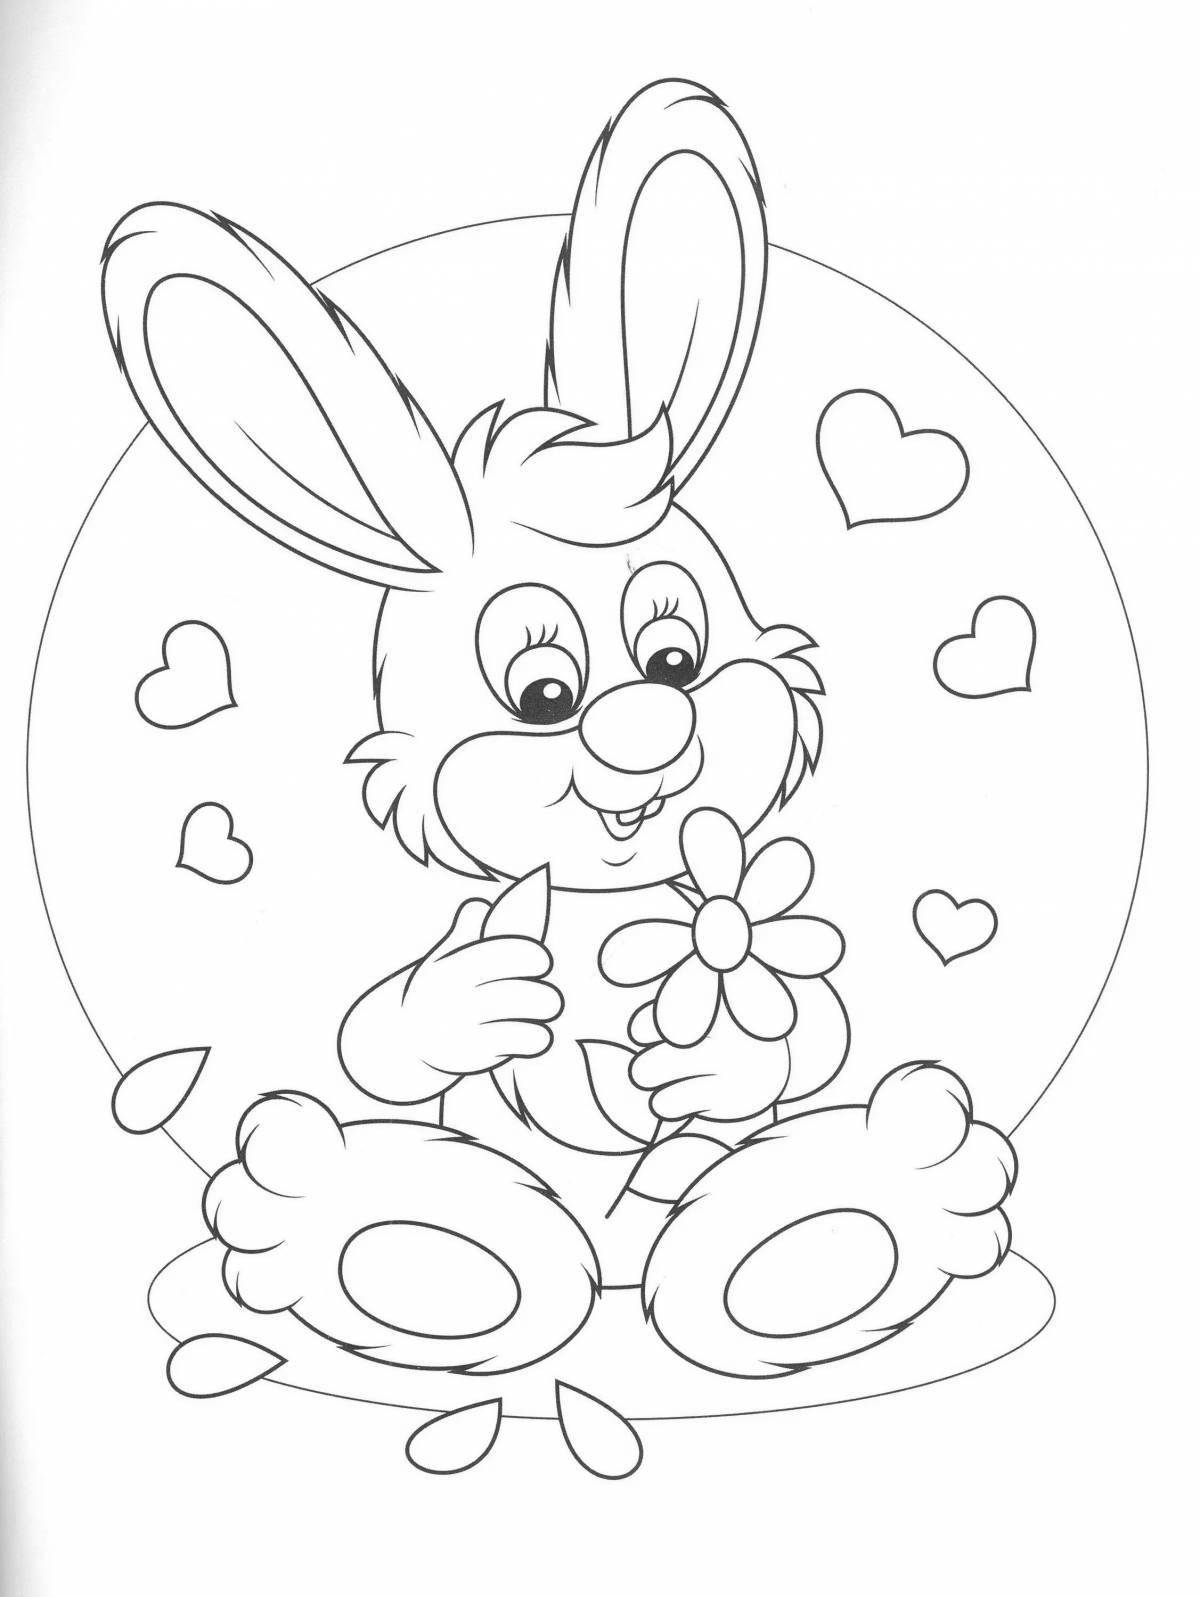 Coloring rabbit in love with a heart